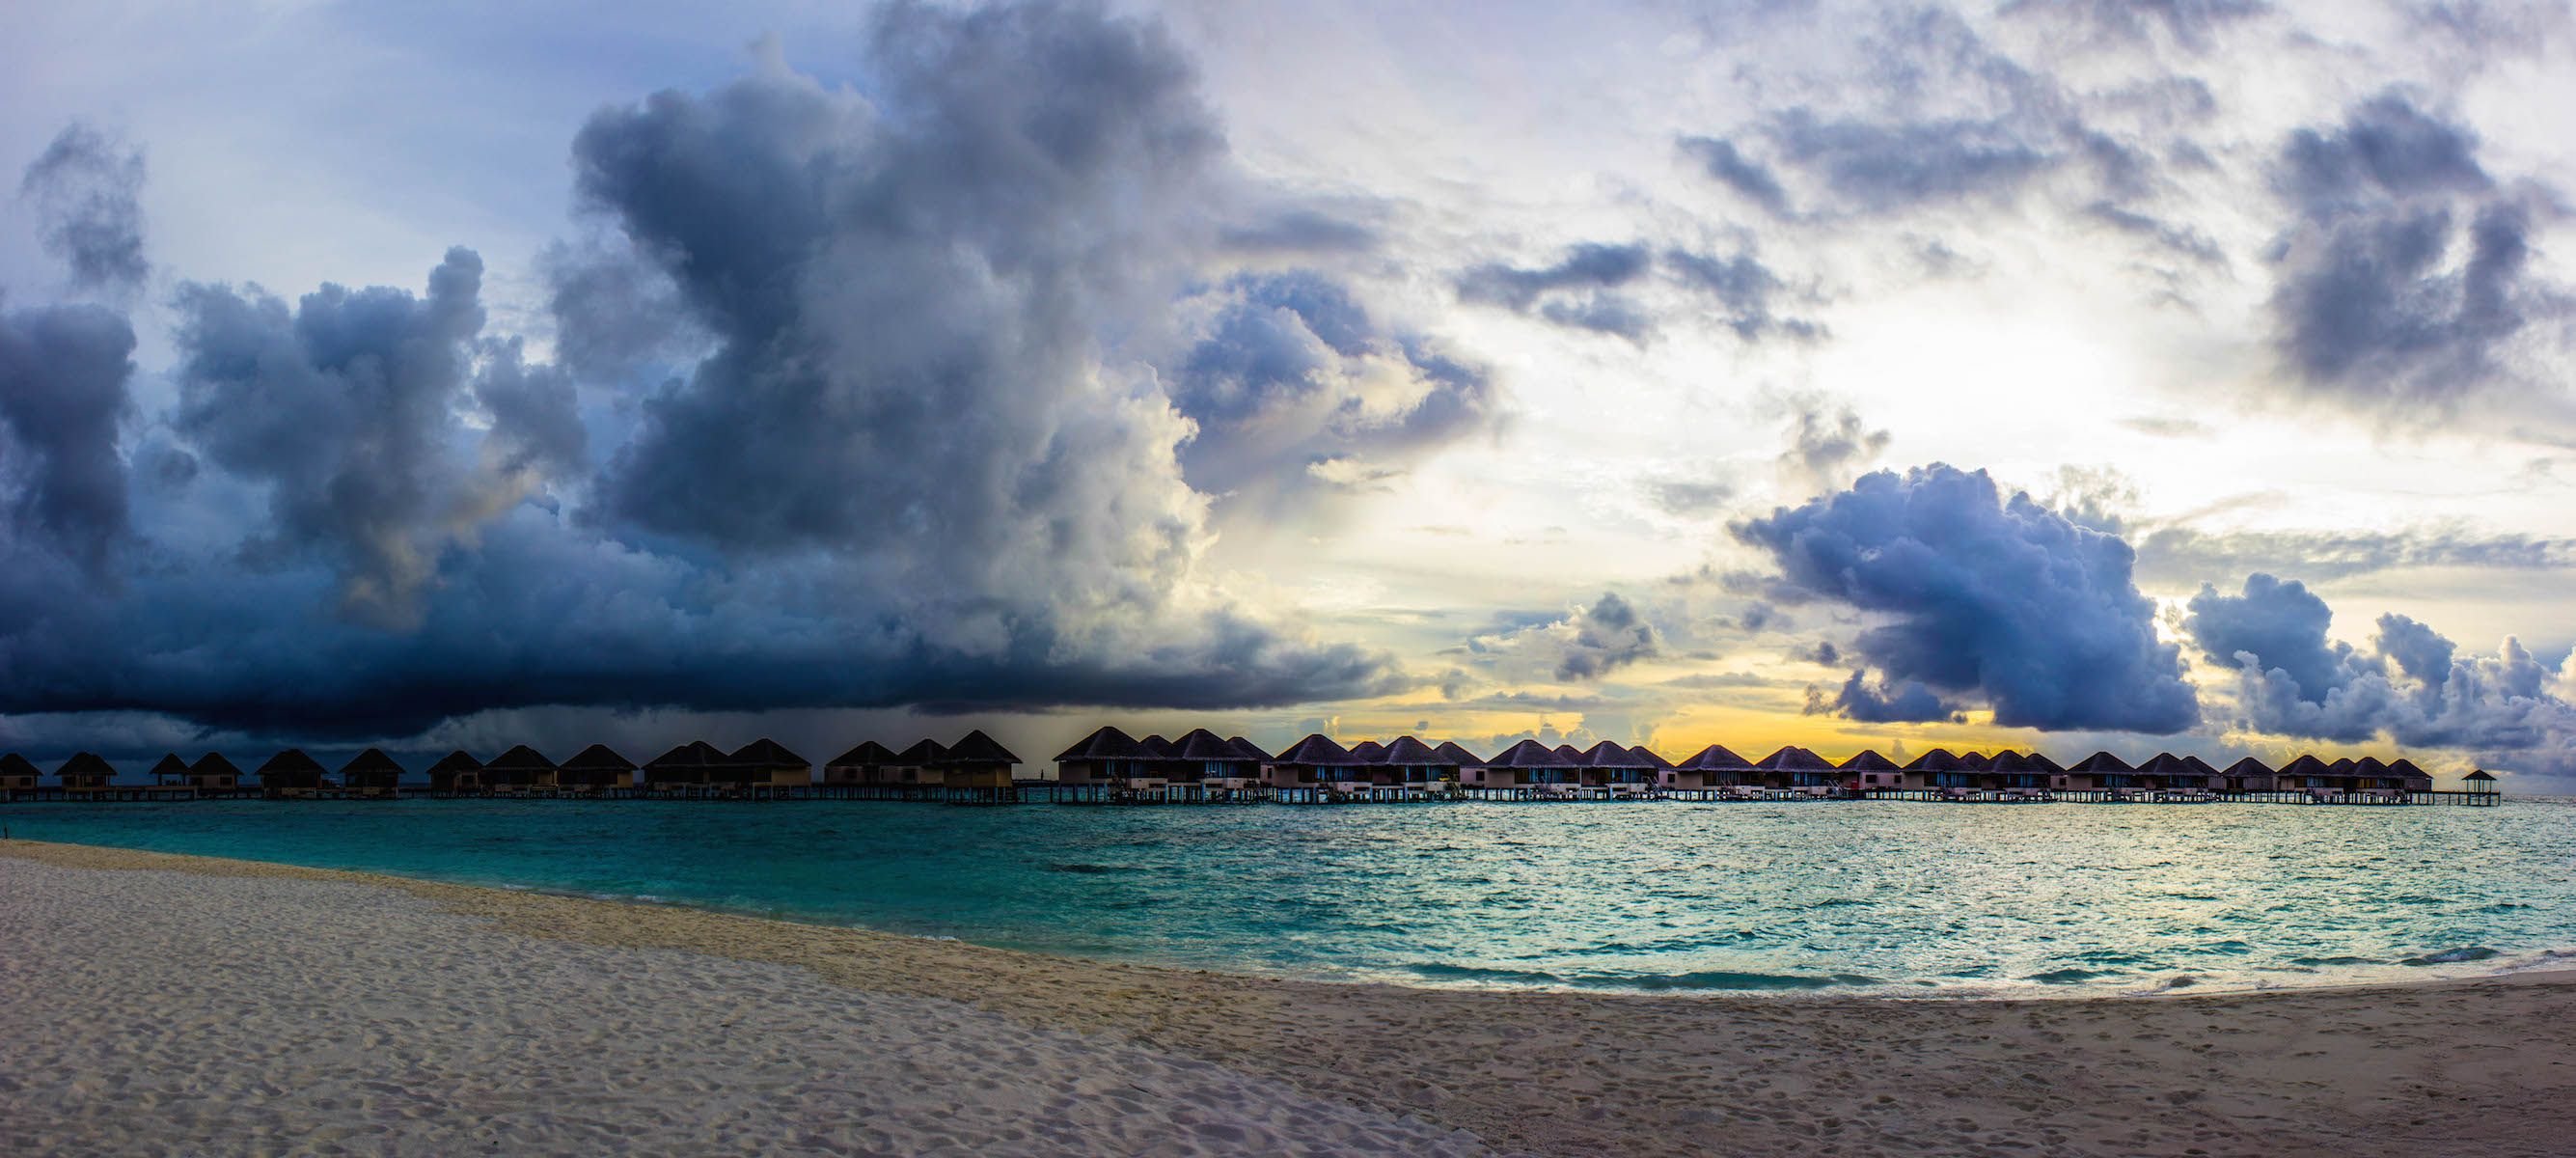 Storm over the water bungalows, Vadoo Resort, Maldives